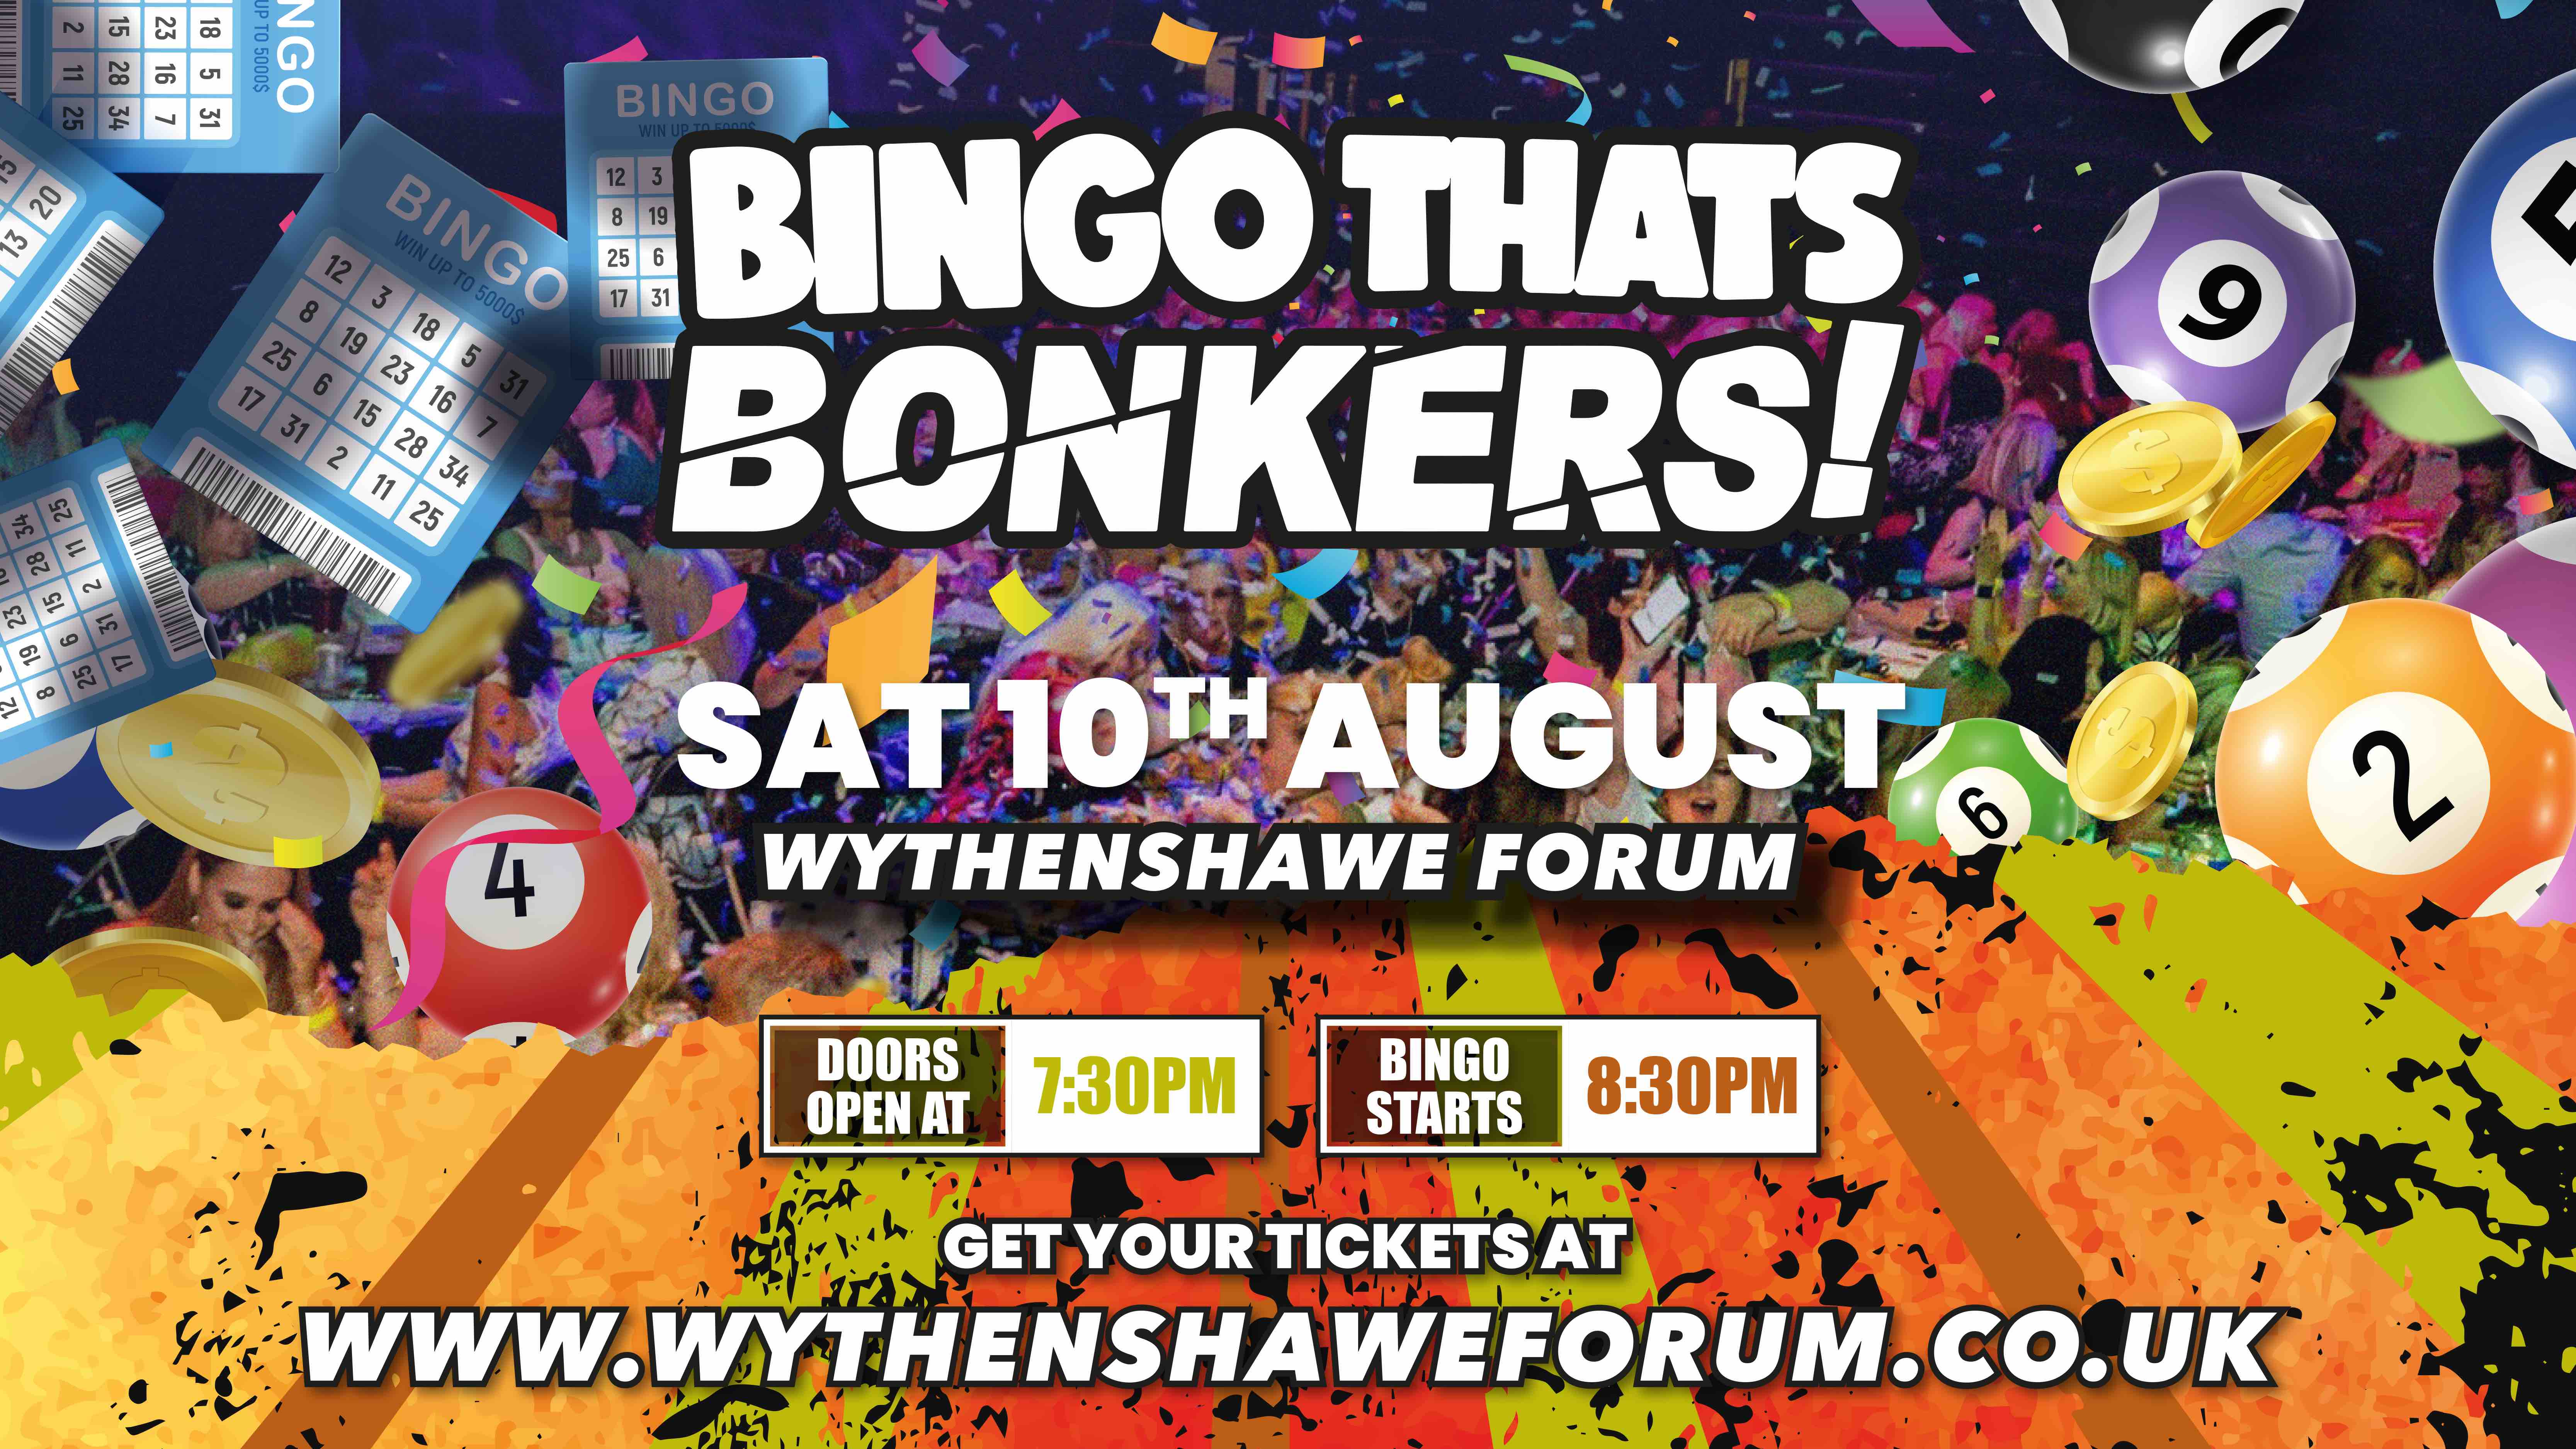 Bingo Thats Bonkers - Wythenshaw Forum event (Bingo Thats Bonkers - Wythenshaw Forum at Wythenshawe Forum, Wythenshawe, ) hosted on the Vivus Quest Platform. Tickets available on vivushub.com